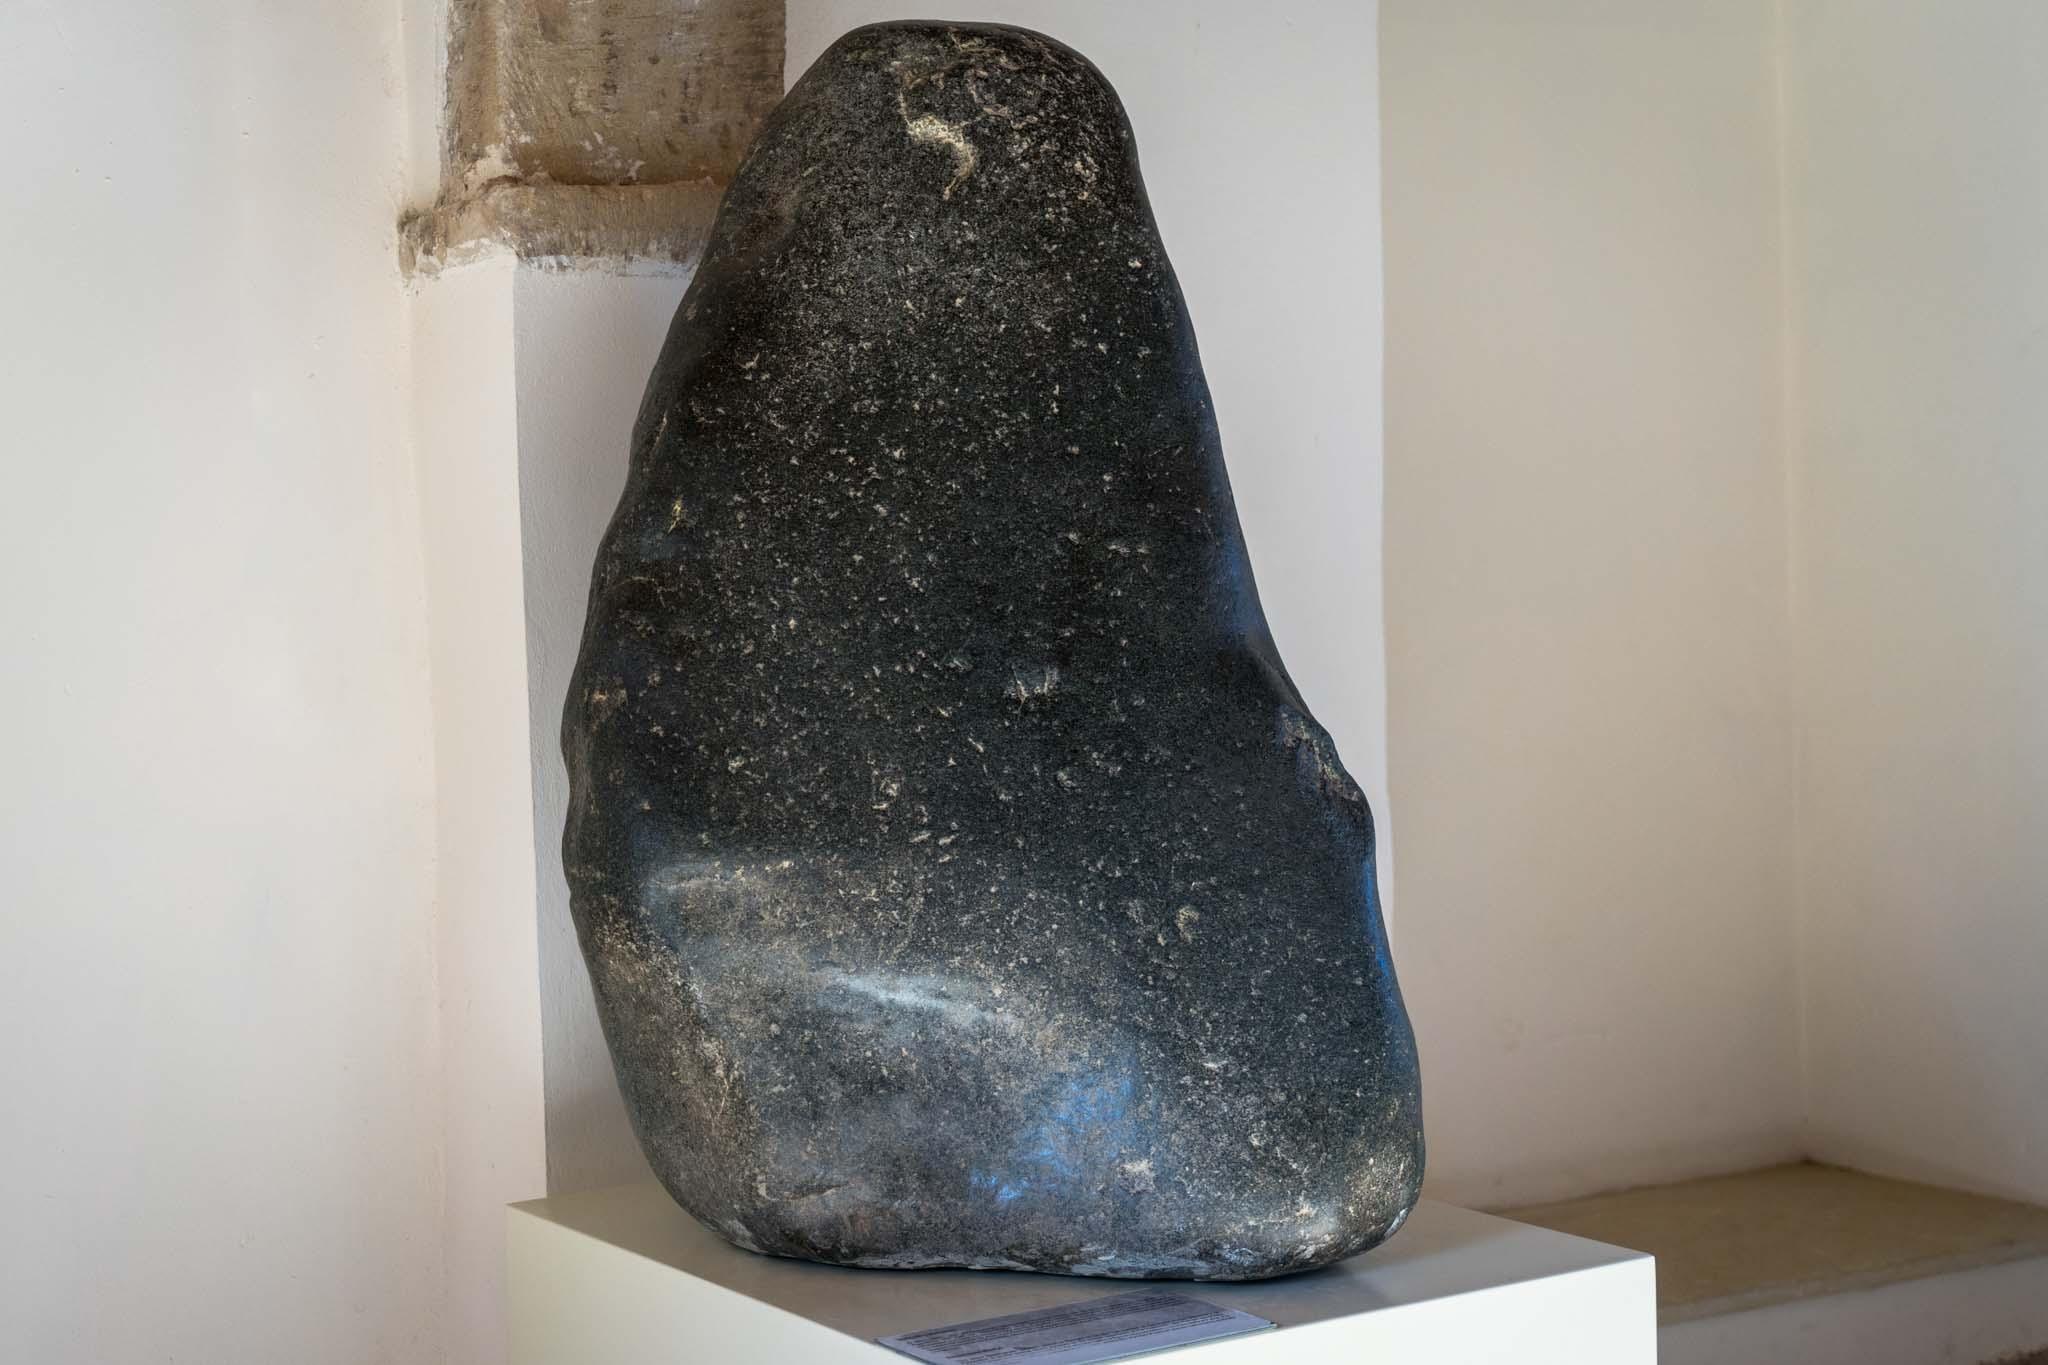 The black basalt stone that represented the Goddess of Cyprus is on display at the museum at the Sanctuary of Aphrodite. – © Michael Turtle